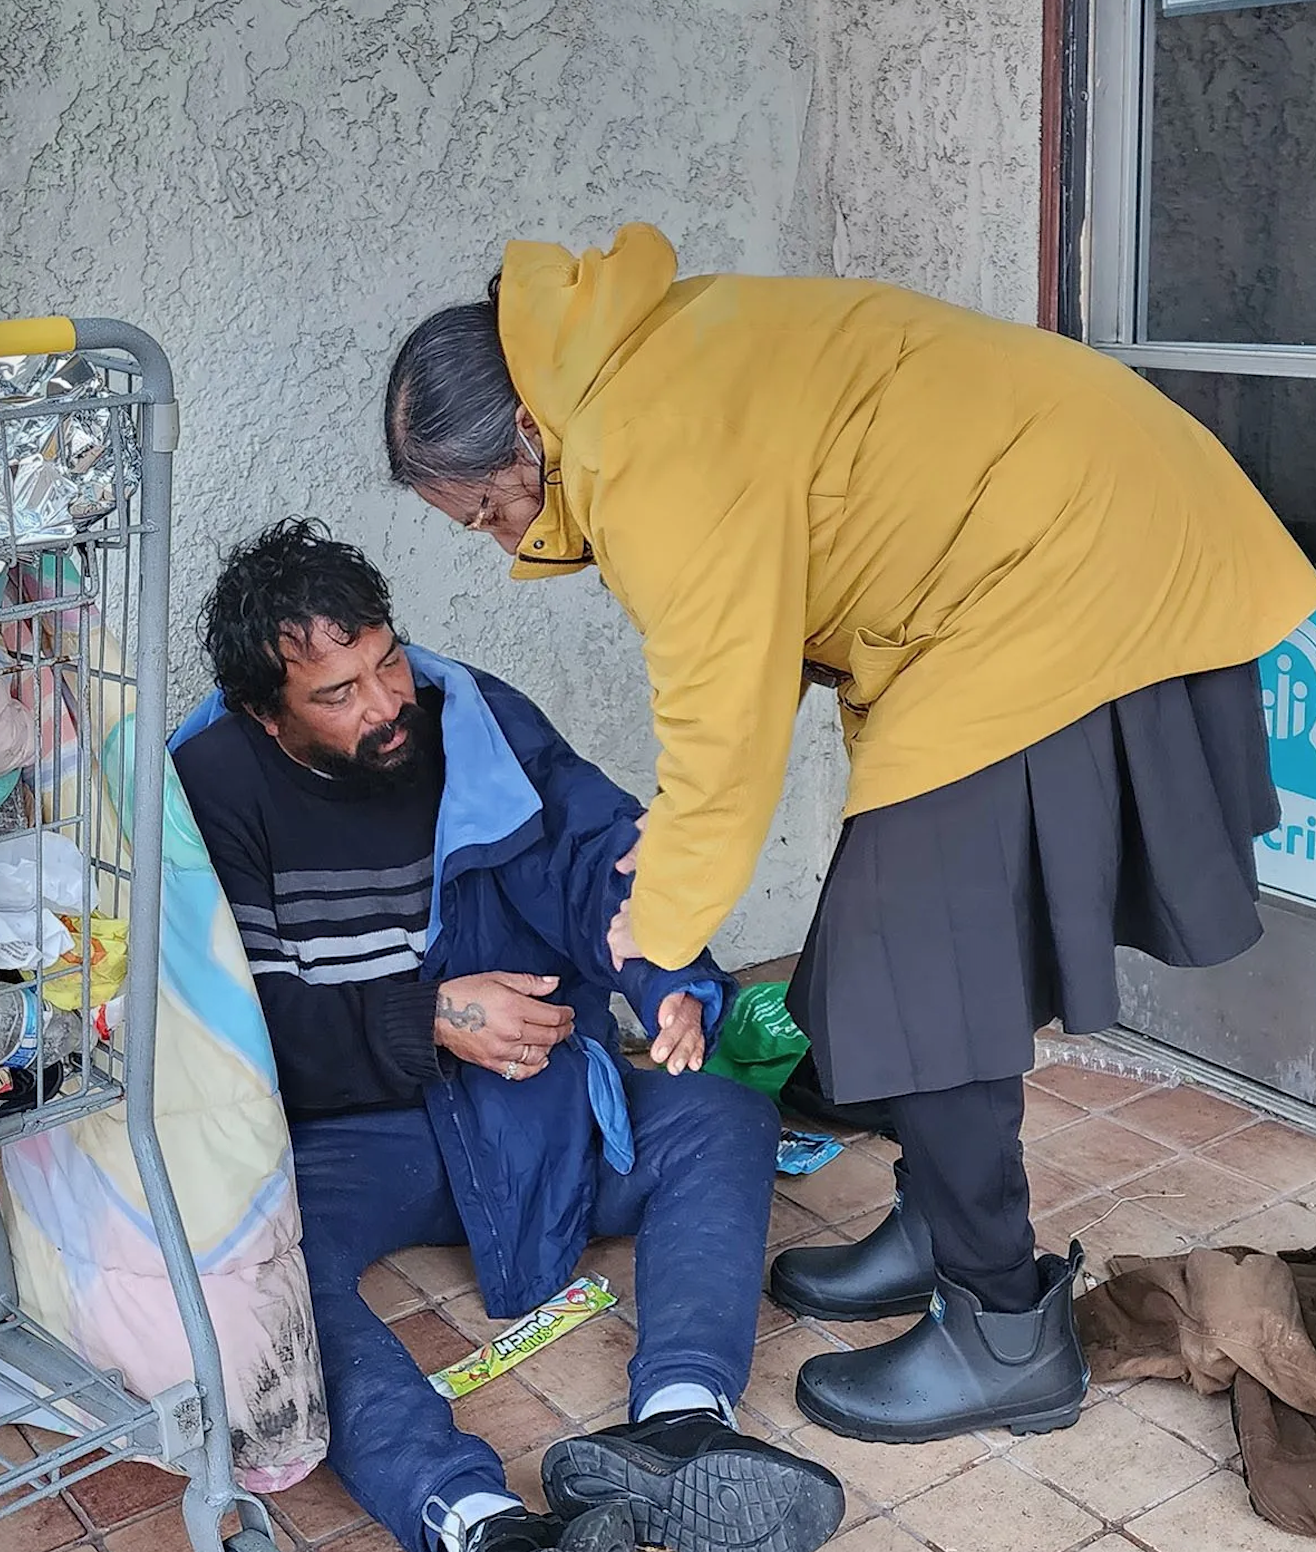 A Mother’s Long Struggle to Help Her Homeless Son